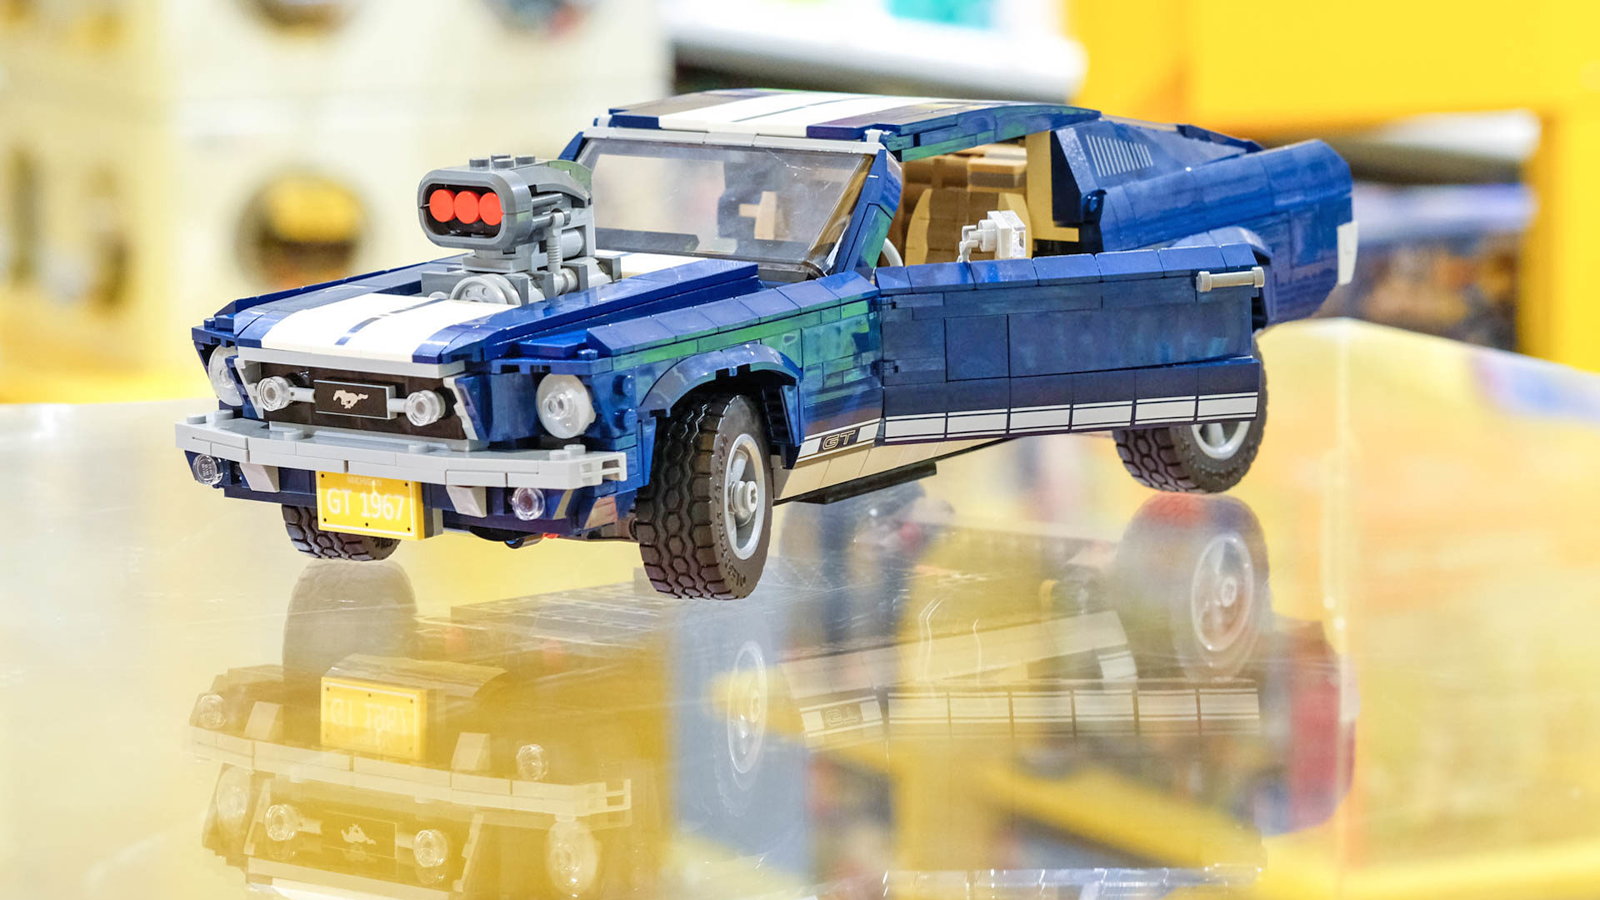 LEGO Rights Historical Wrong, Builds 1967 Ford Mustang GT Creator Set